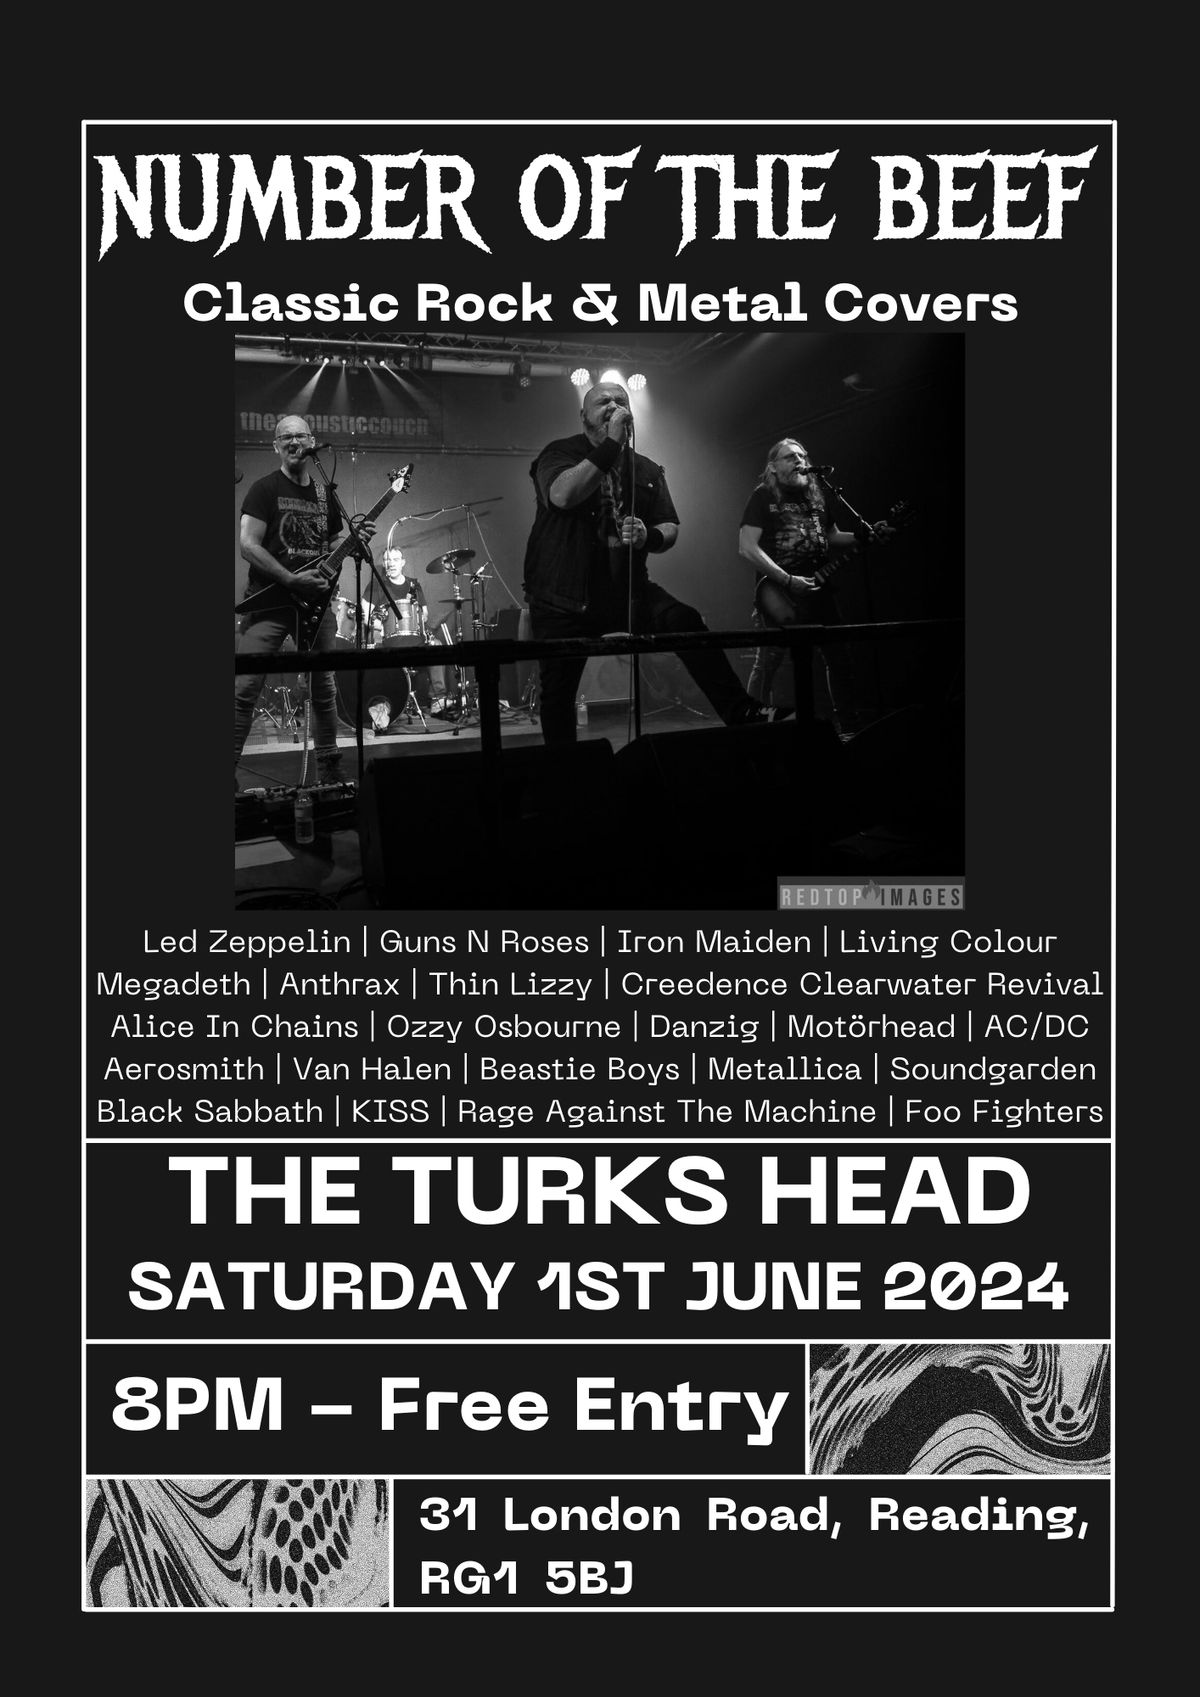 Live @ The Turks Head - Number Of The Beef